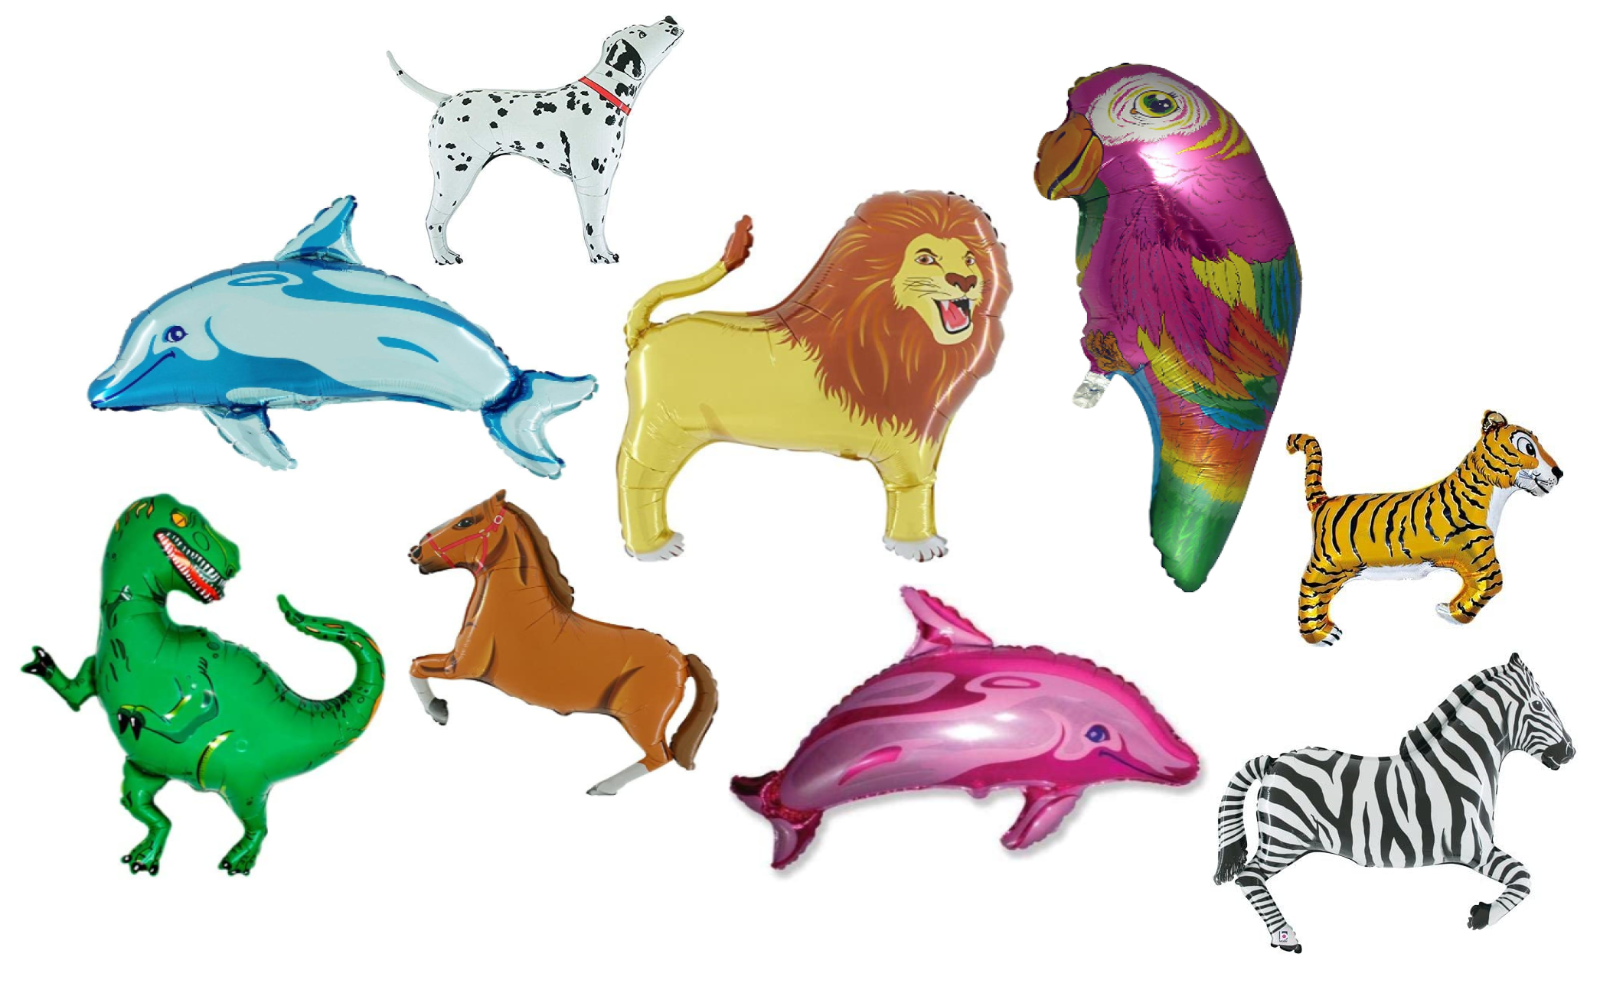 100 Assorted Animal Foil Shaped Balloons for Wholesale | eBay